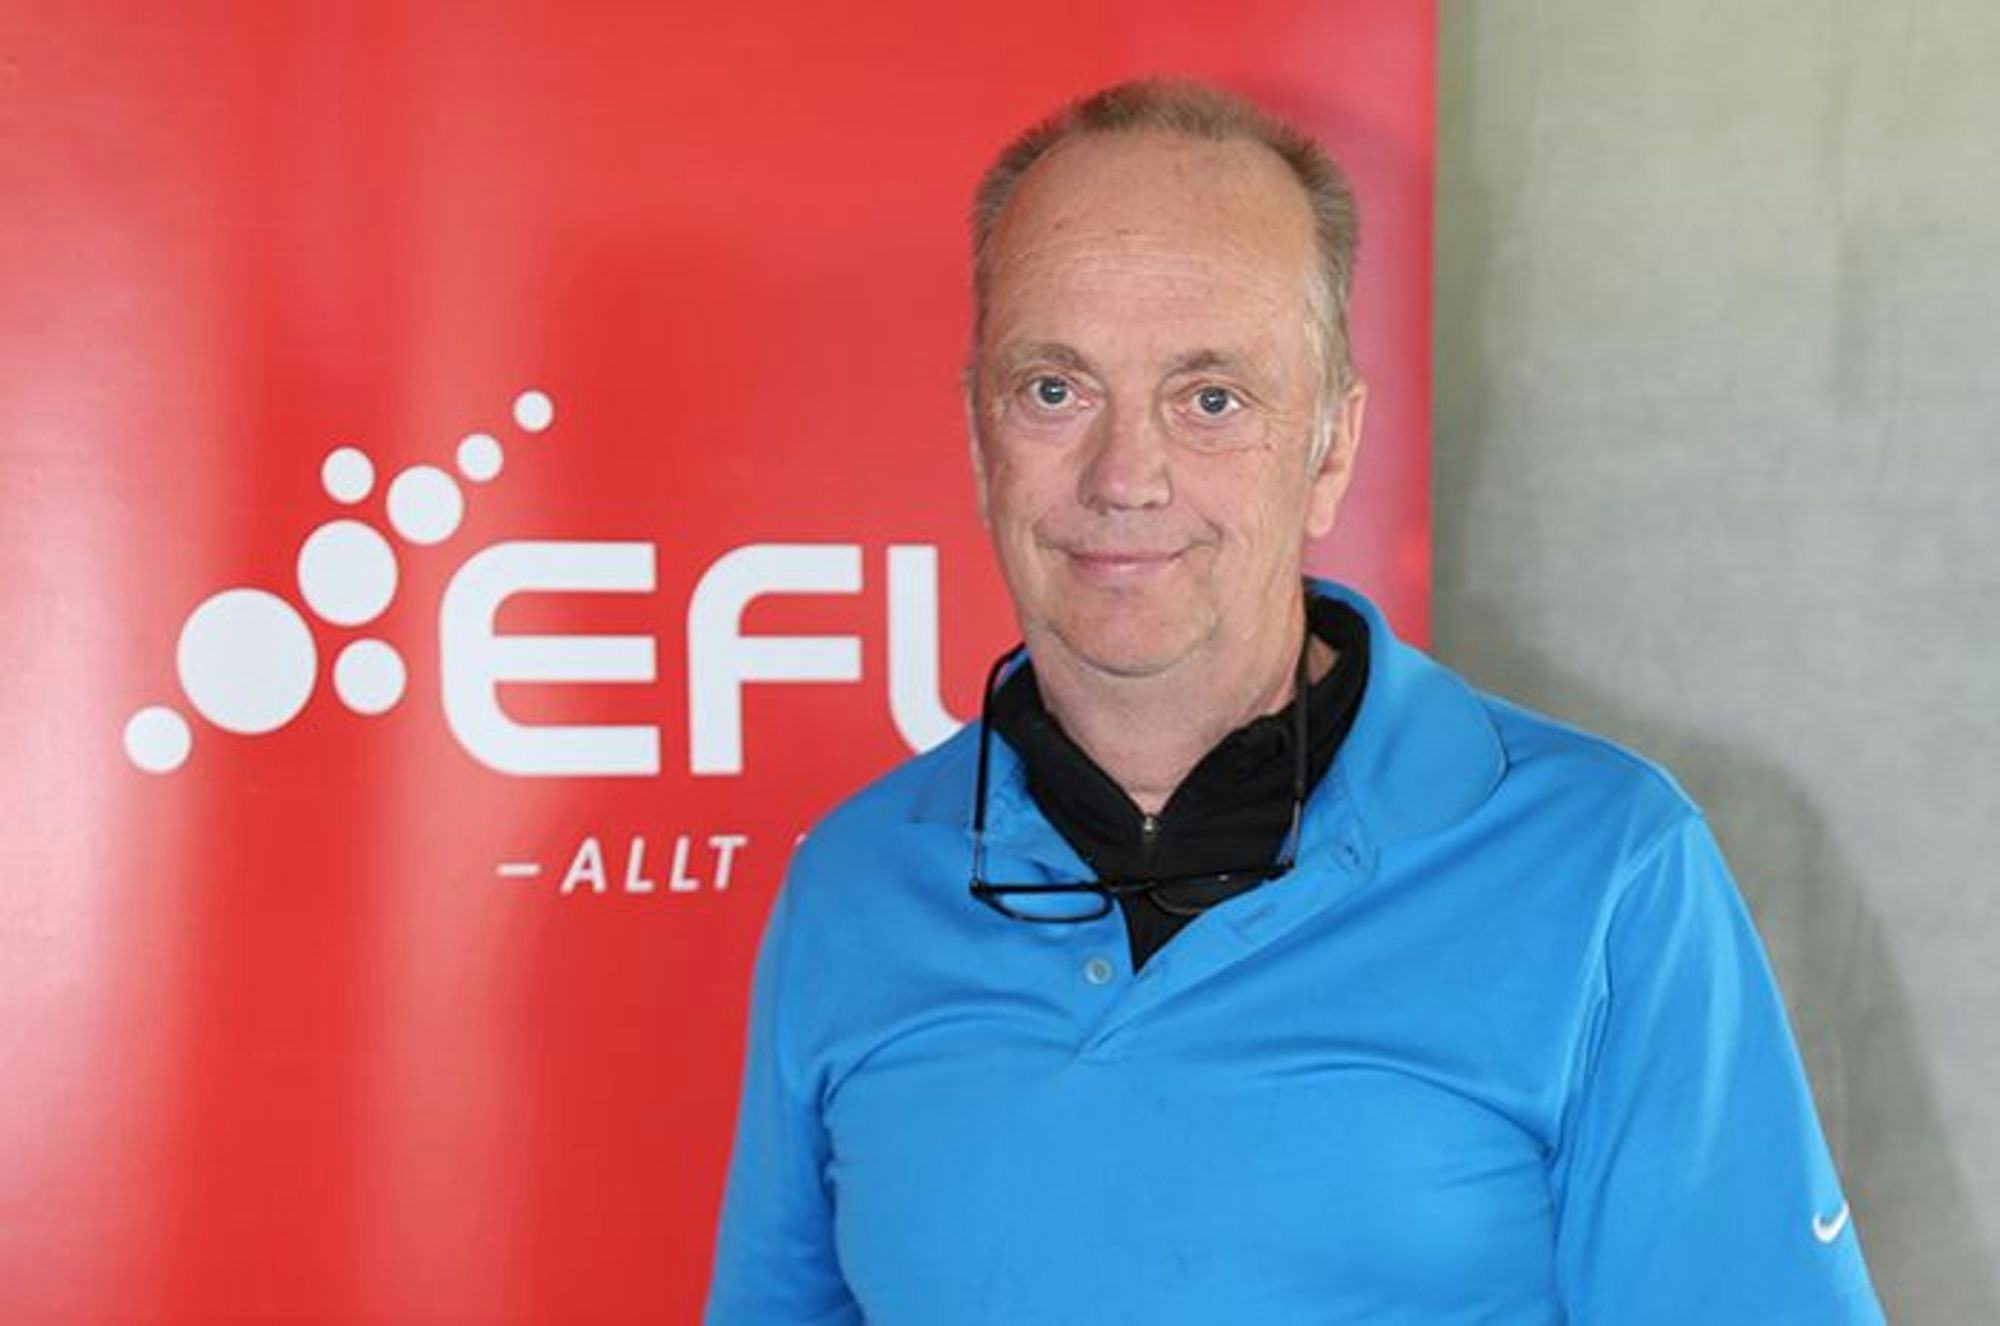 A man standing next to EFLA red promotional banner